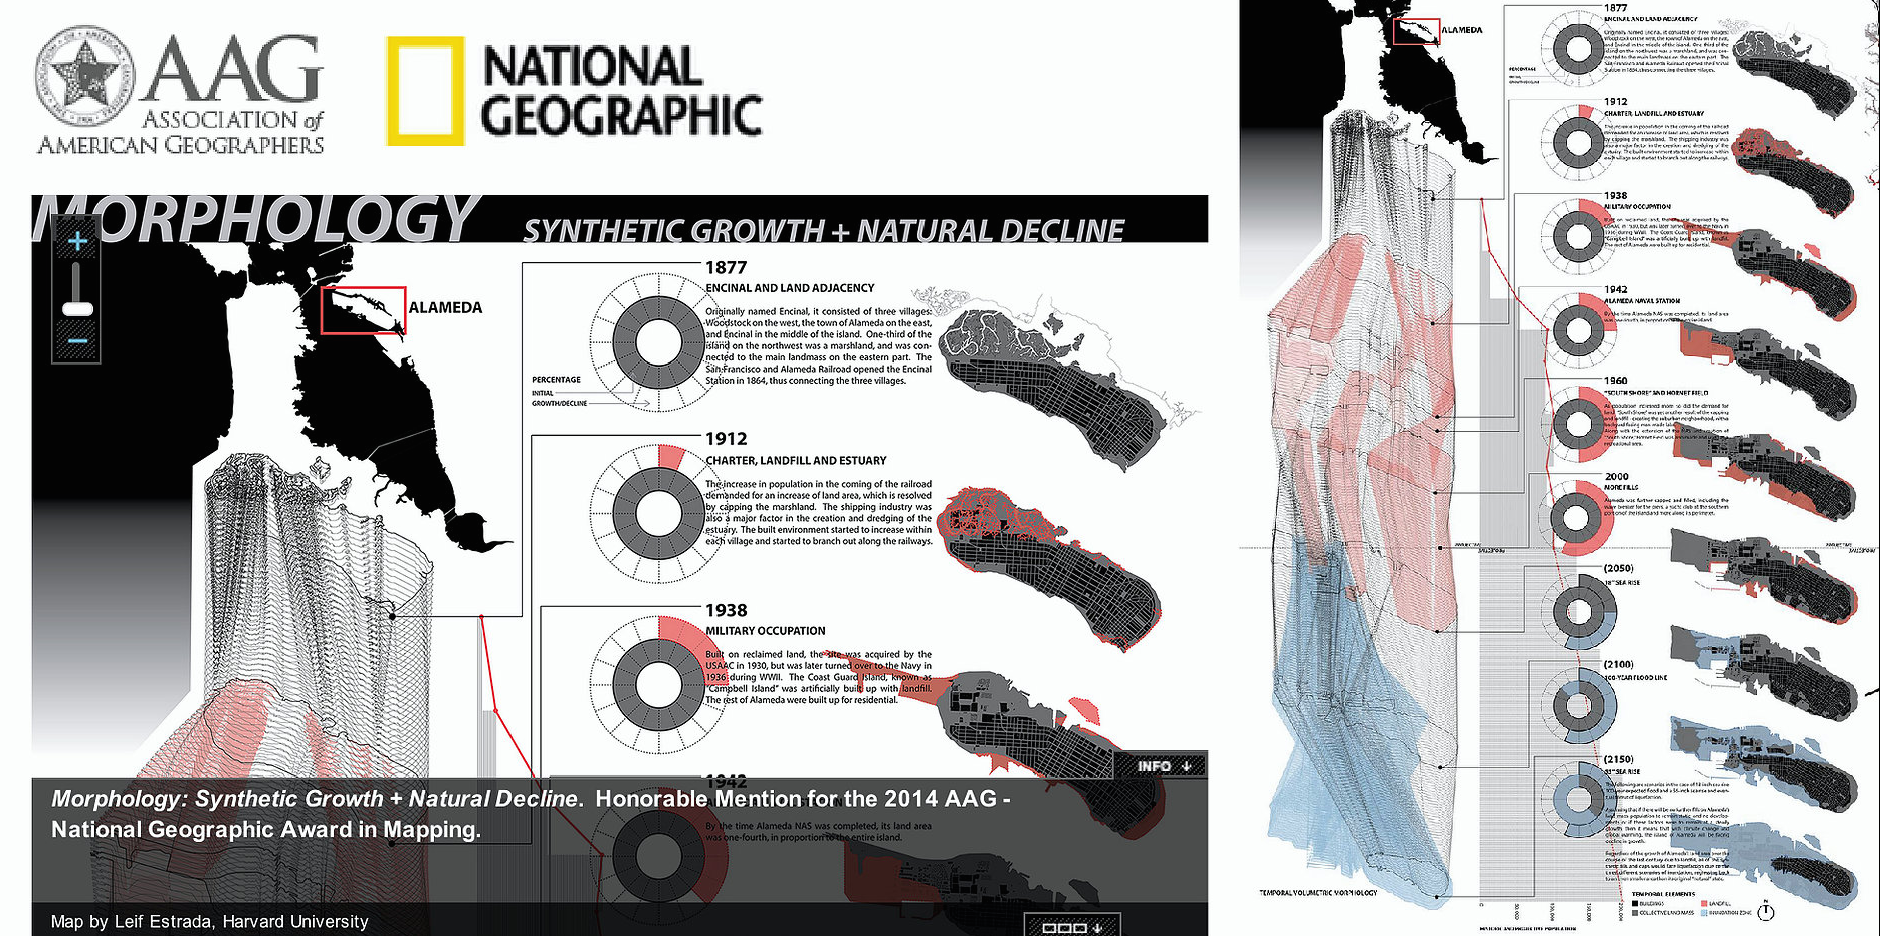 2014 National Geographic Award in Mapping (NatGeo)